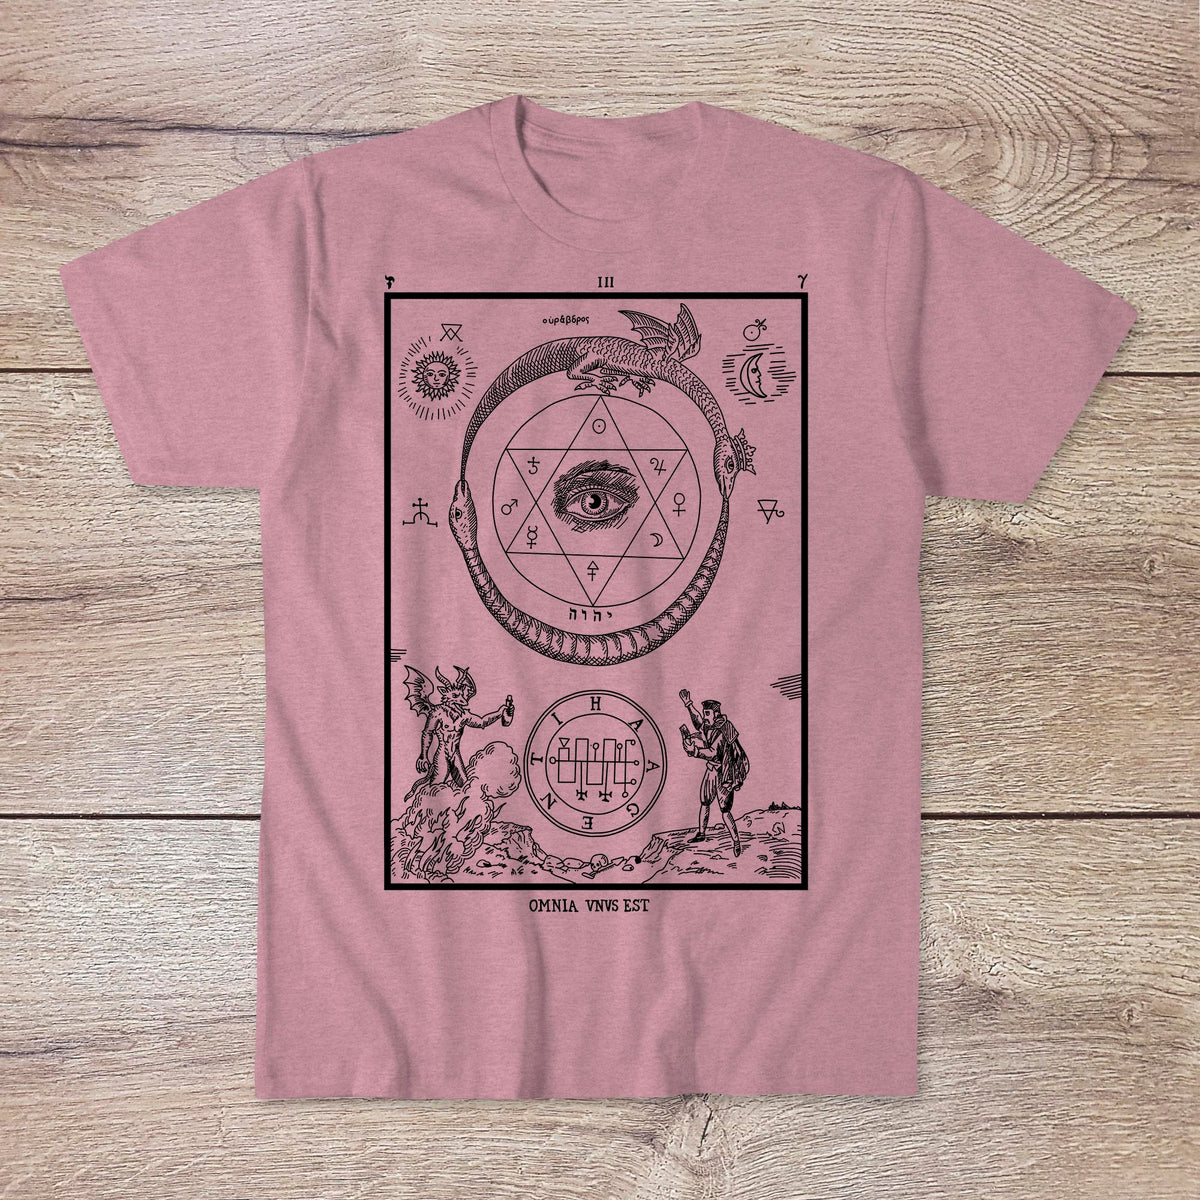 Medieval Alchemy Hermetic Eye of Providence | Ouroboros Kabala European Esoteric Mystical Traditions Graphic Art T-Shirt - Sacred Surreal